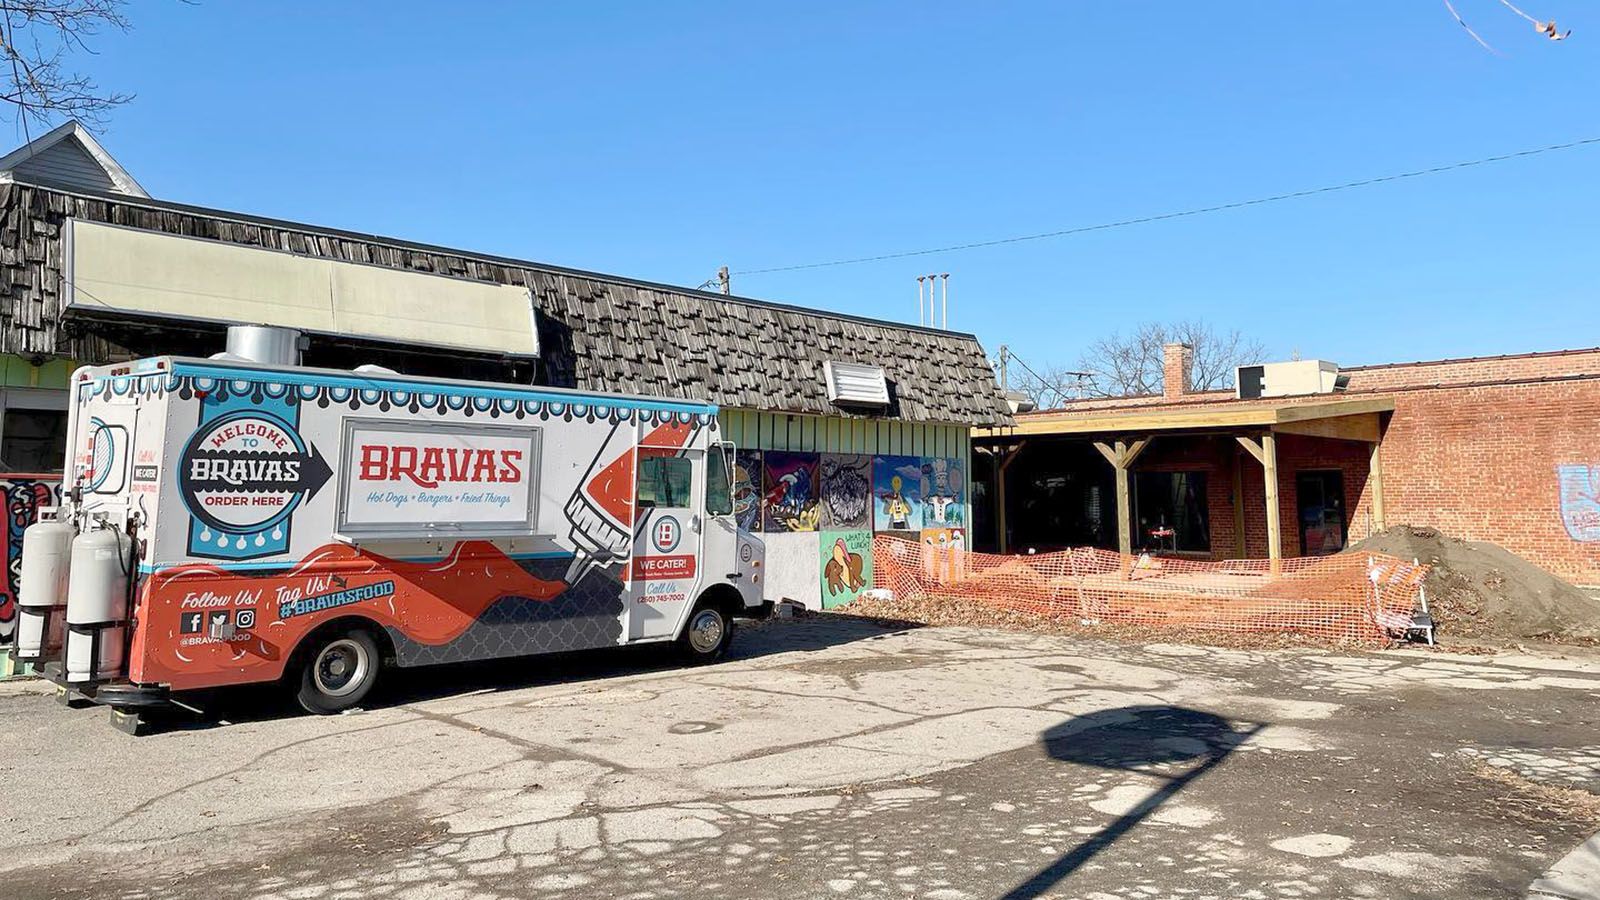 Until Bravas new location opens, the food truck is hear to serve your burger needs.